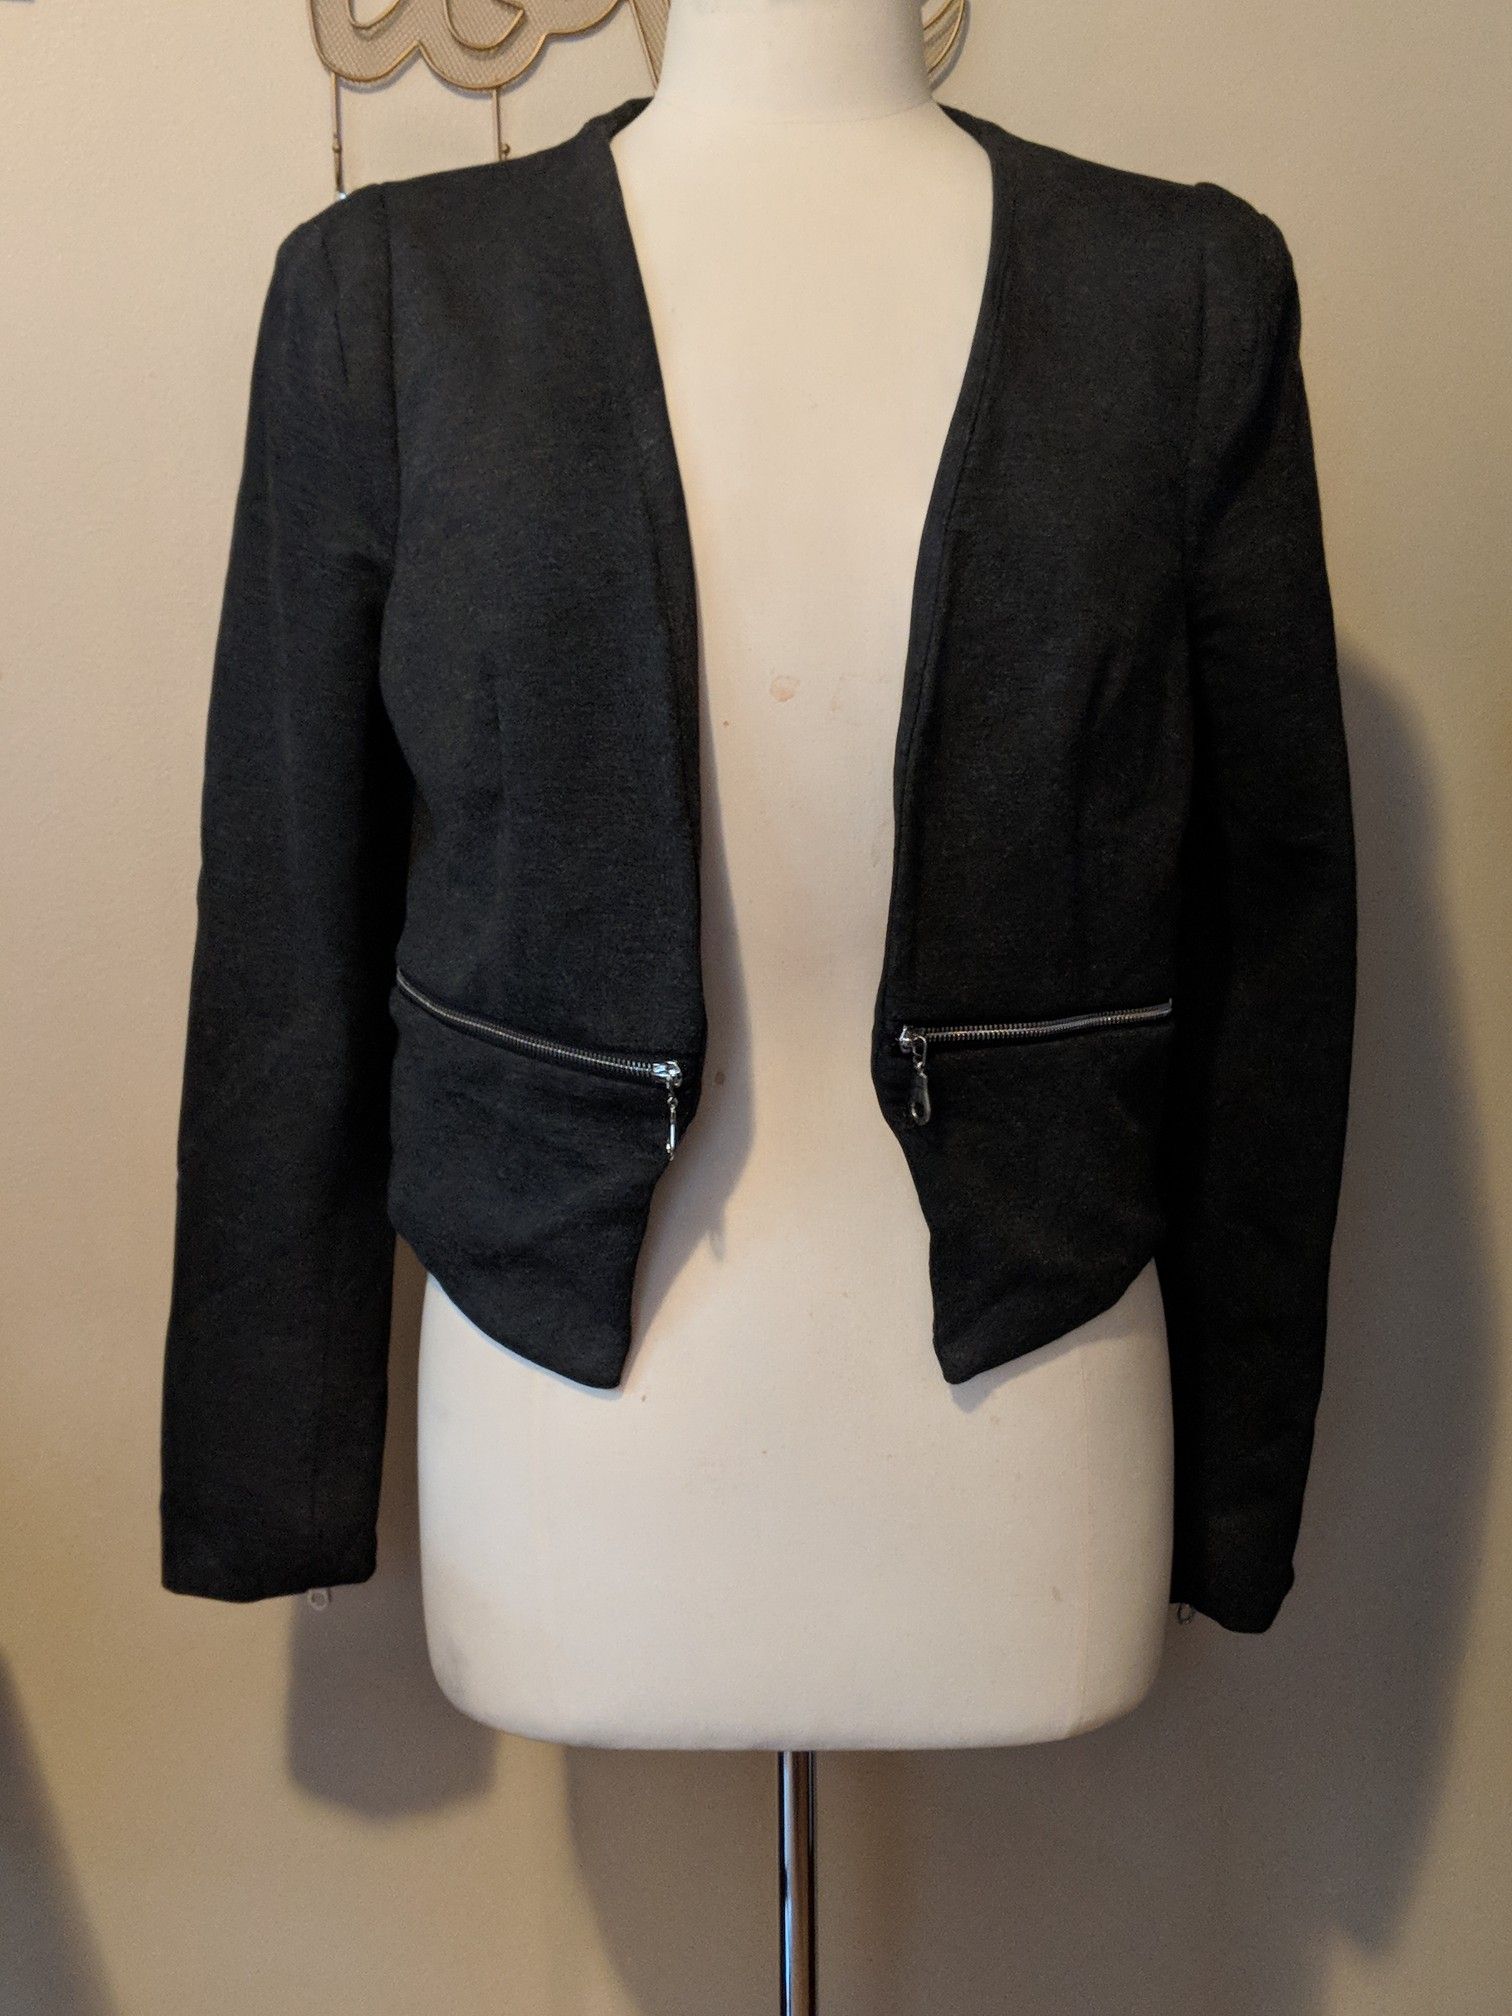 Jacket with zipper detail size small